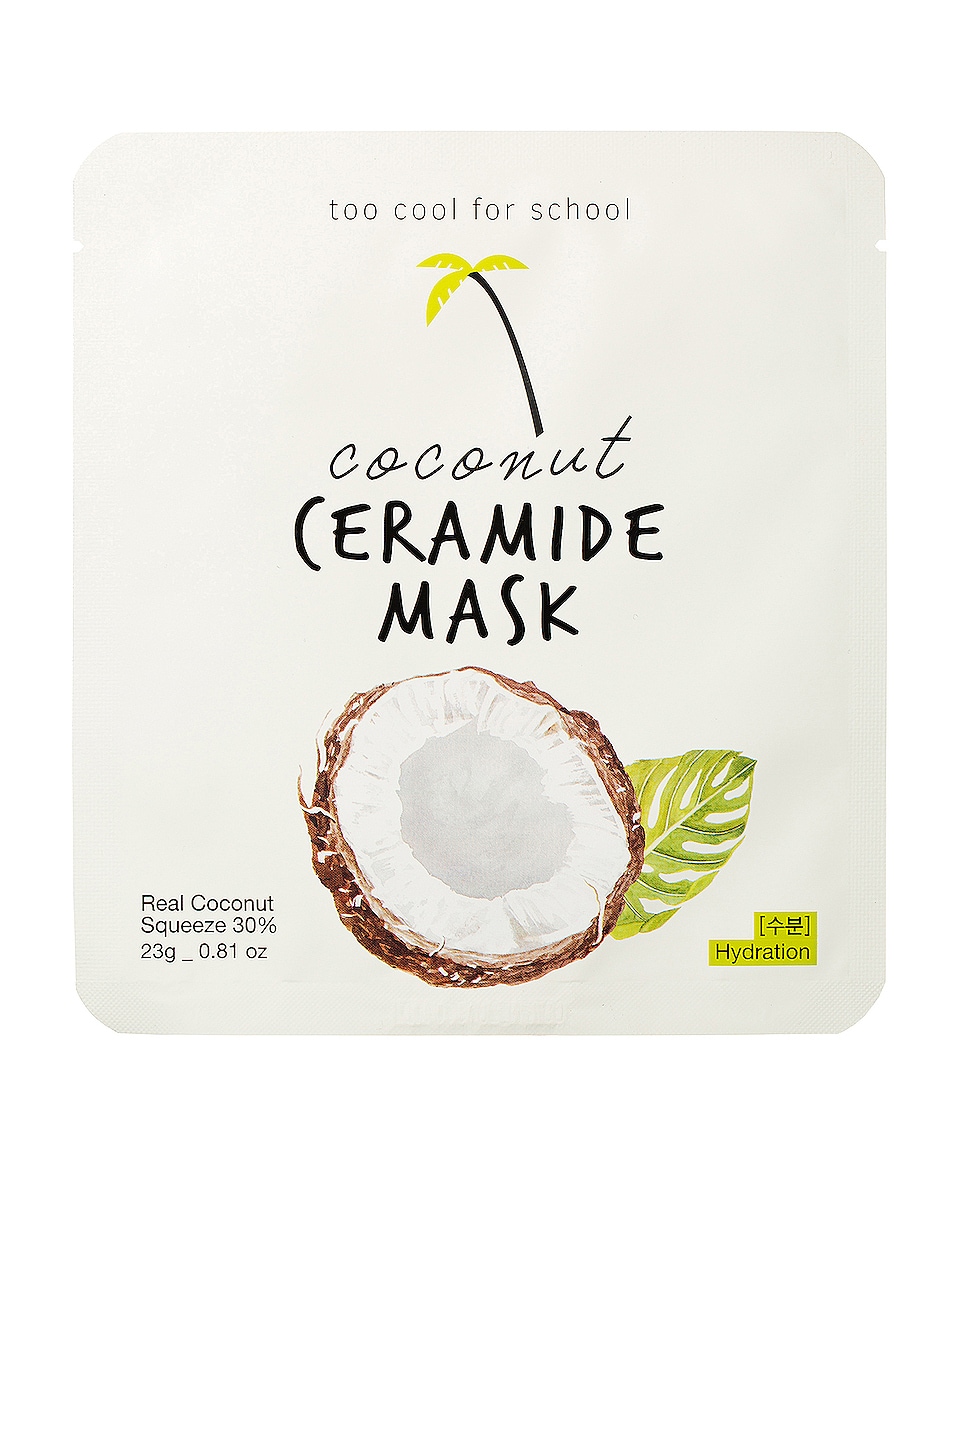 TOO COOL FOR SCHOOL COCONUT CERAMIDE MASK,TCOL-WU14